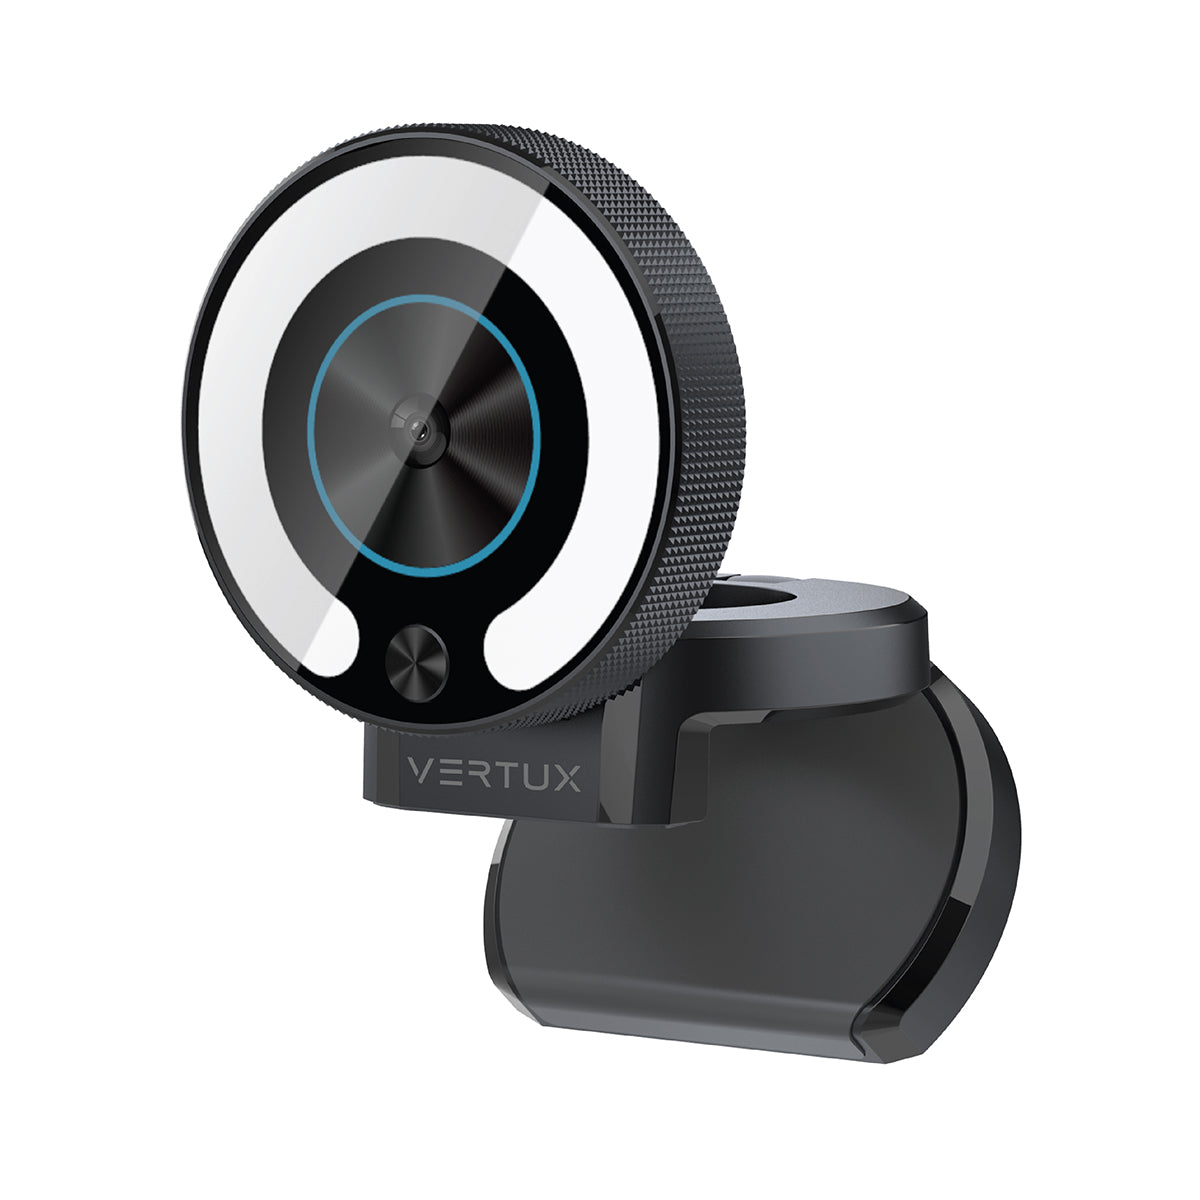 Ultimate Webcam for the Sharpest Clarity